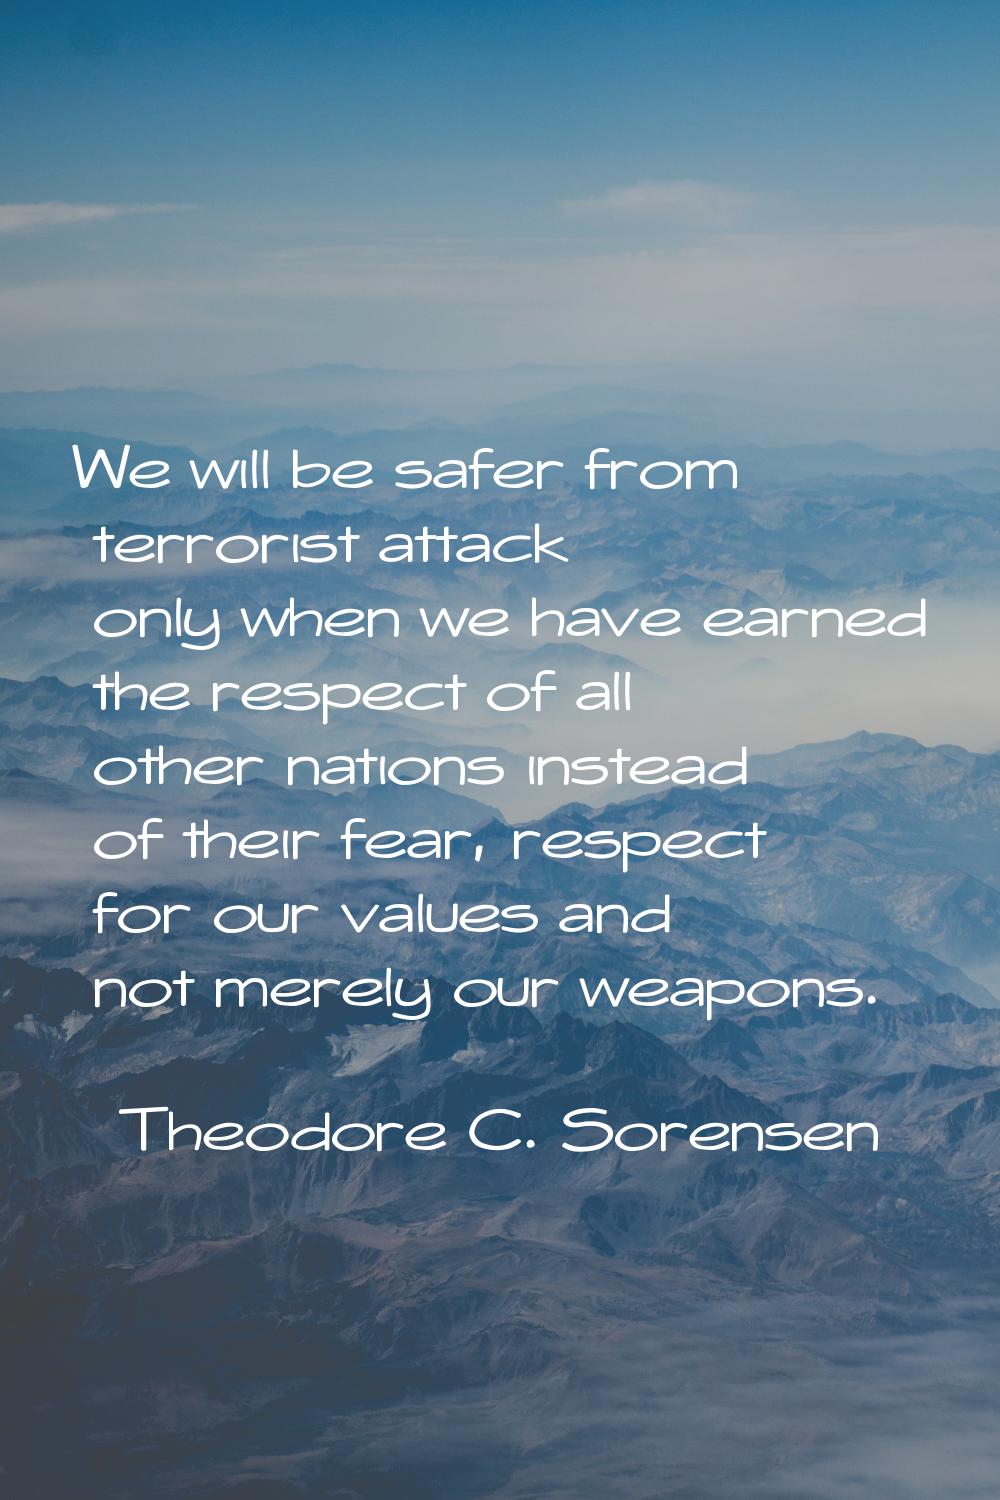 We will be safer from terrorist attack only when we have earned the respect of all other nations in